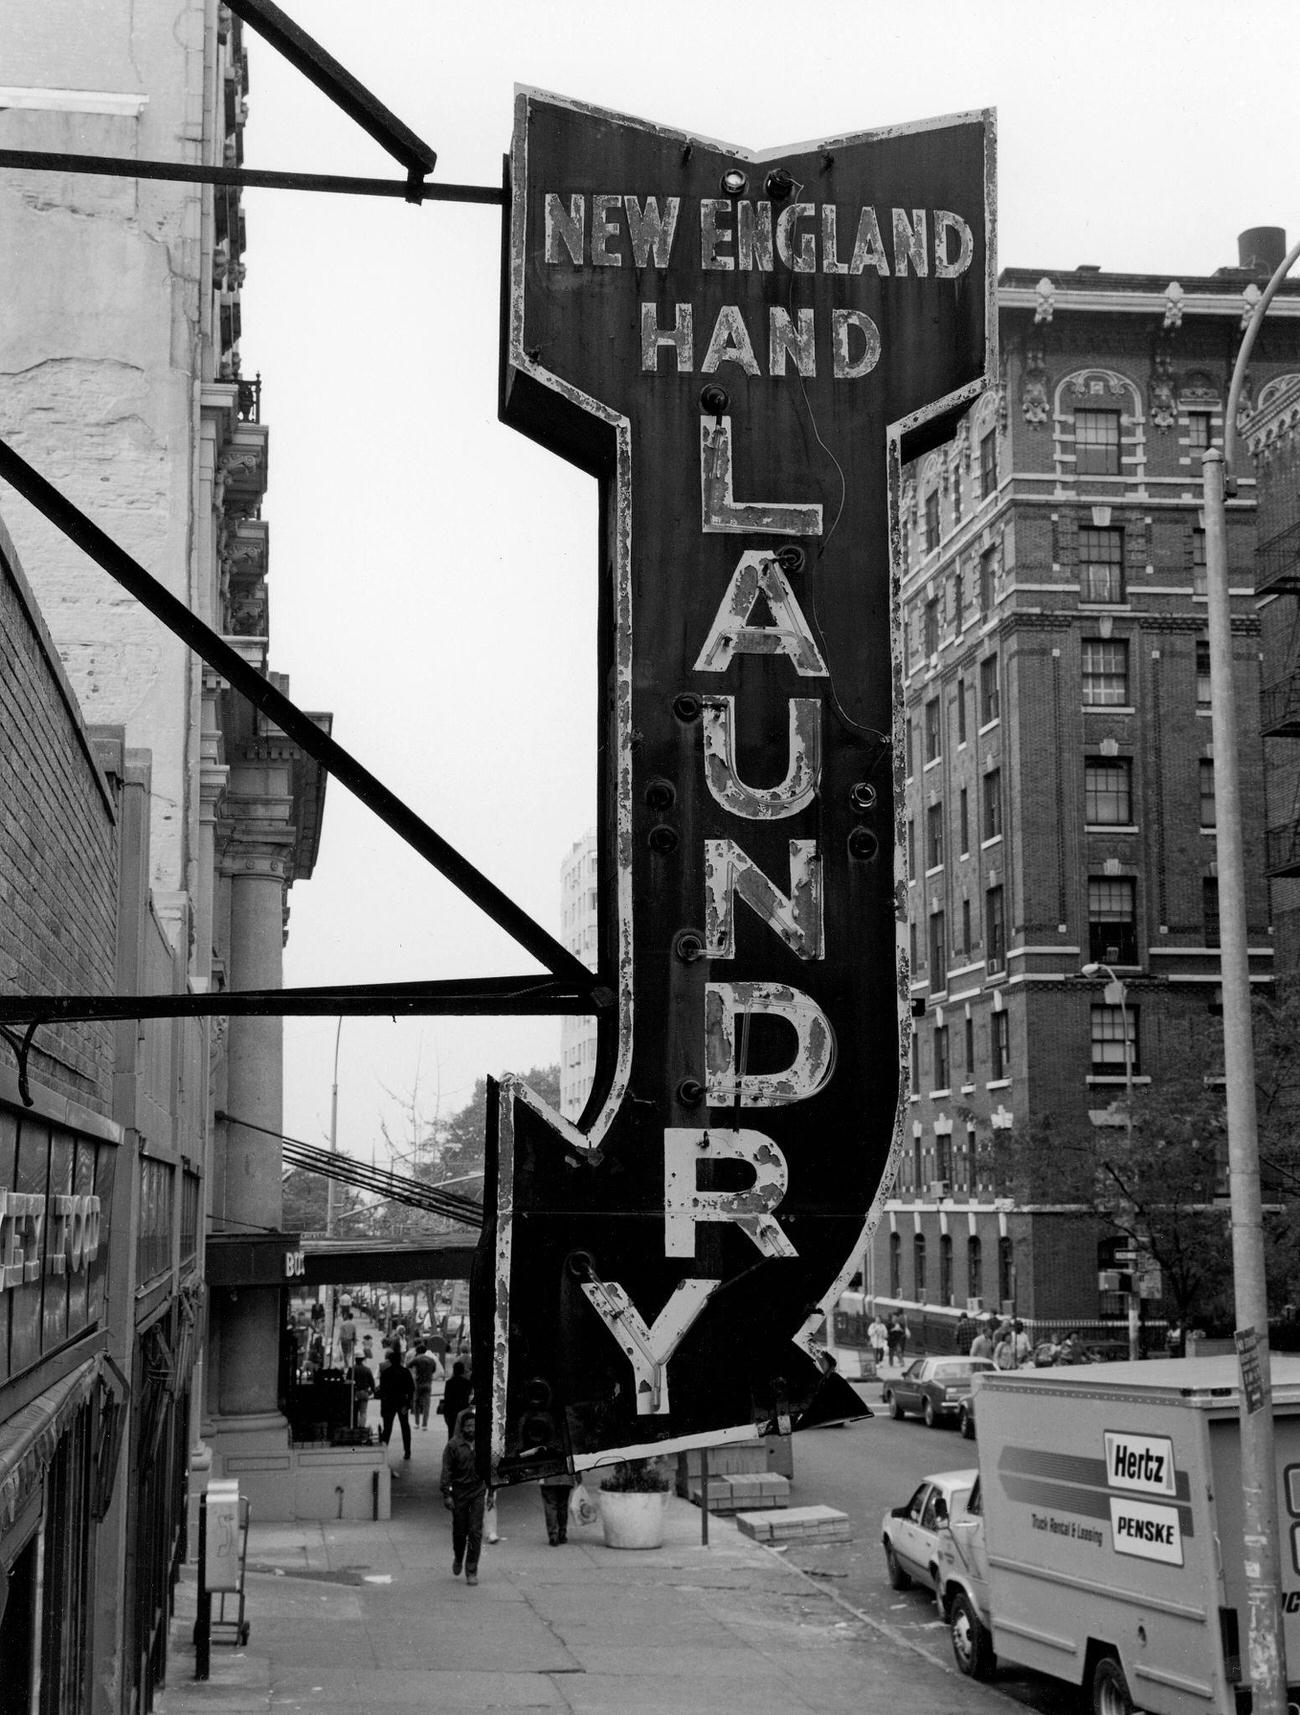 Weathered Sign For New England Hand Laundry In Brooklyn Heights, 1985